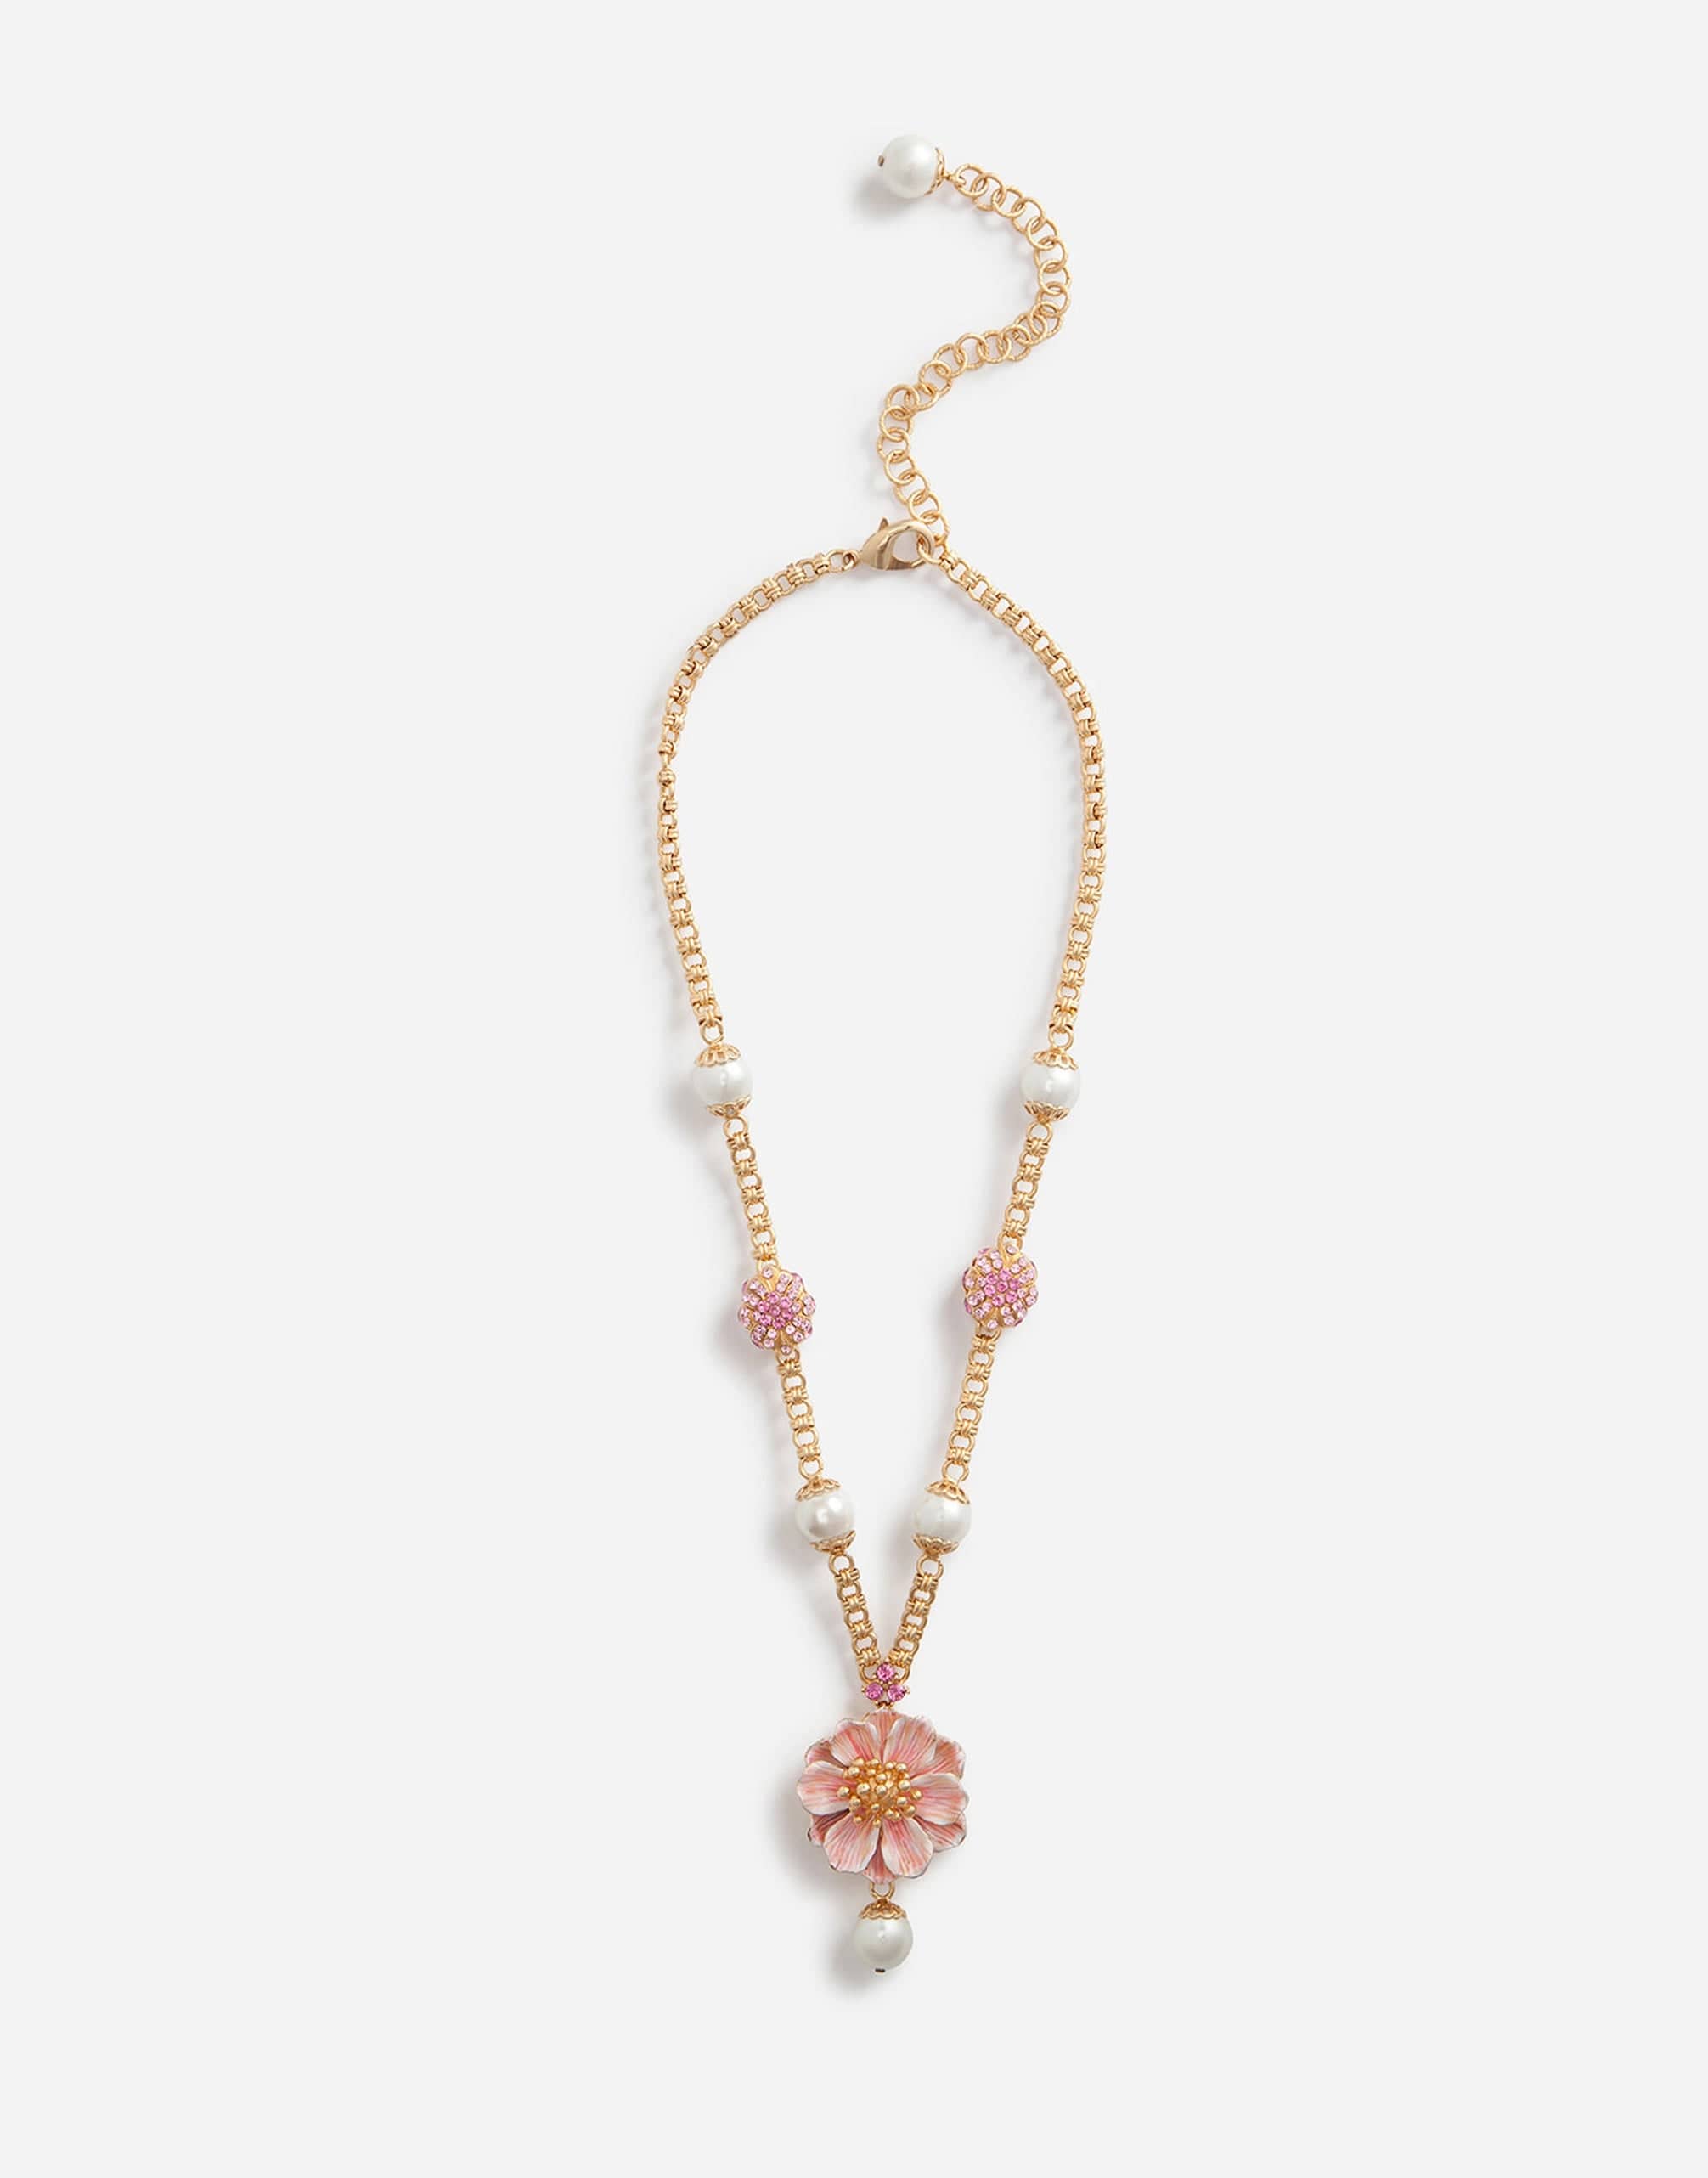 Dolce & Gabbana Resin Pearls & Flower Pendant Necklace